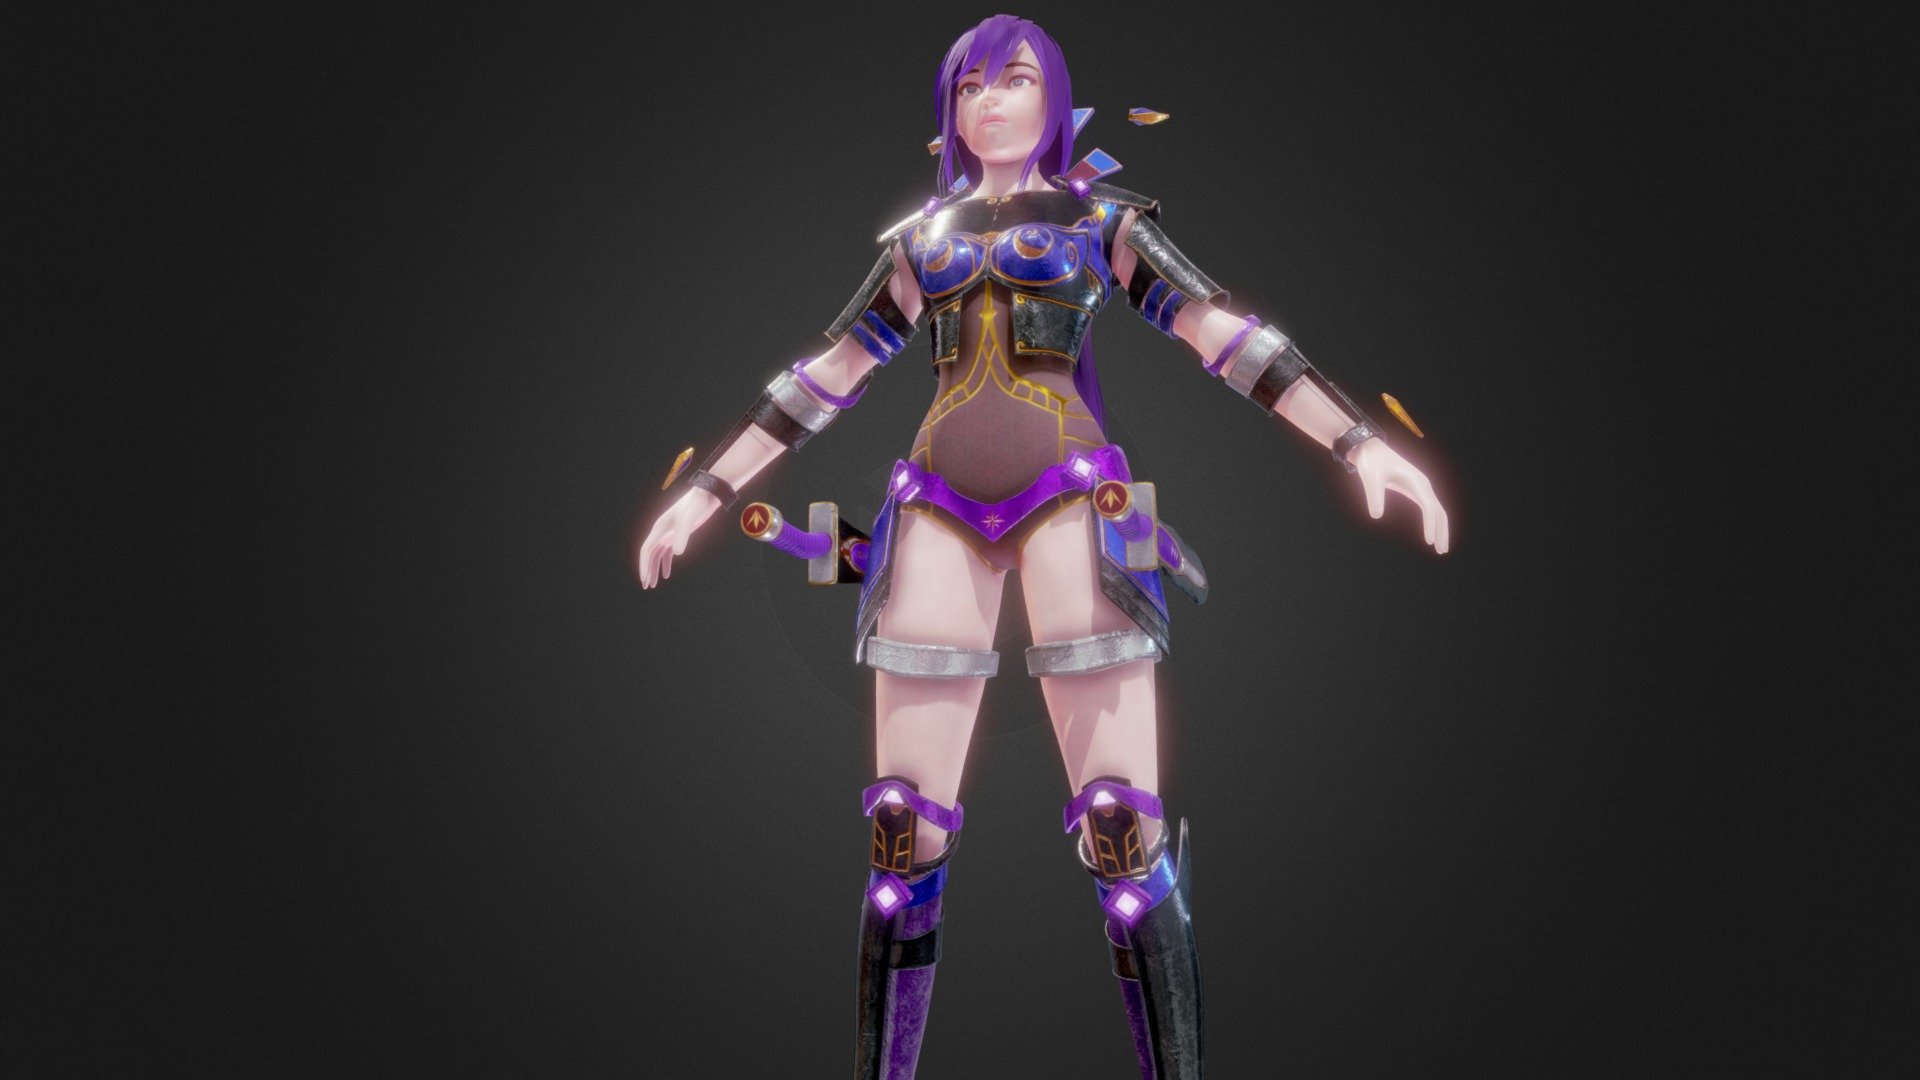 I made few changes to my mai chartacter of game, Witch is I don't have any idea to call it or what type of game will be when it's finnished.

But I did research about art style of stylized character like Heroes of the storm, Mobile Legend, and dota. Then I made some changes for my character to make her more sexy and hot I geass,

But I like the new version of my Starlight Character 3d model